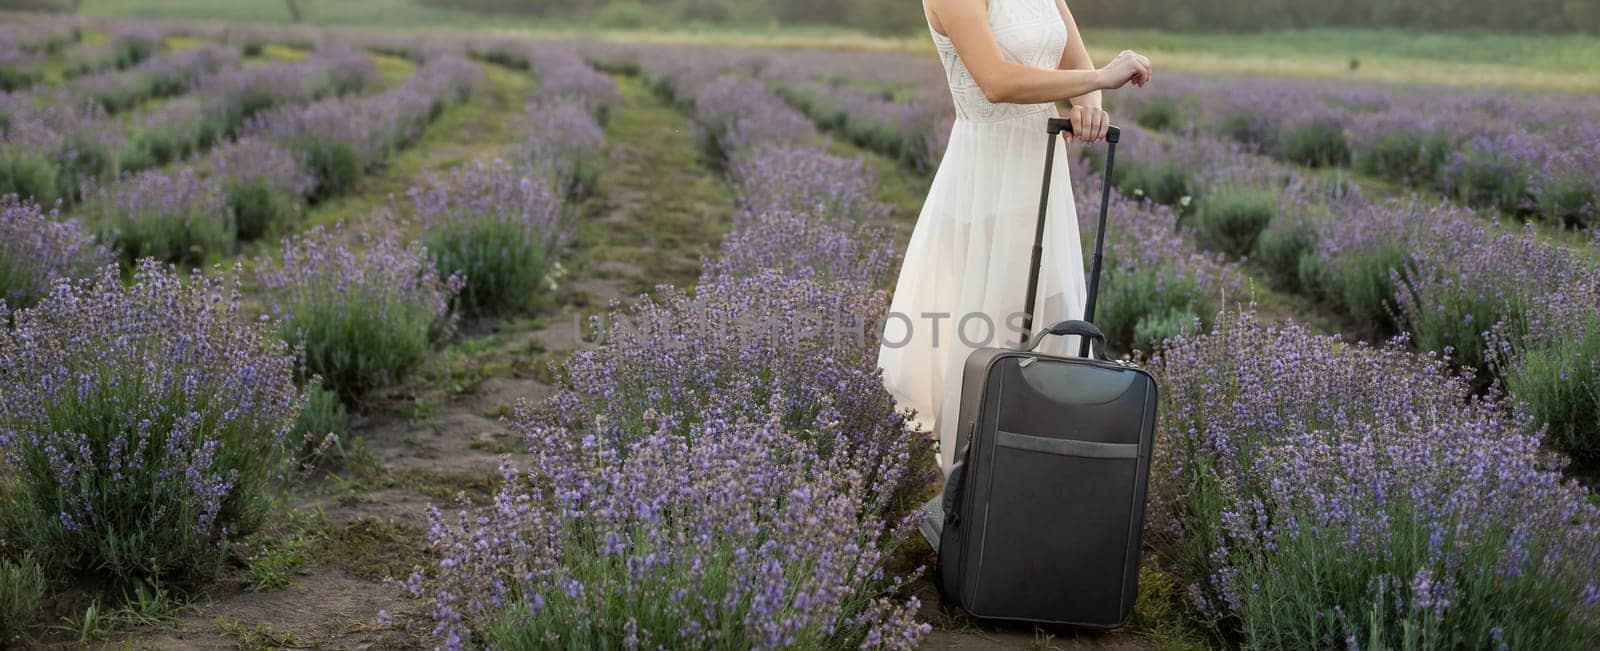 woman with luggage in lavender field by Andelov13